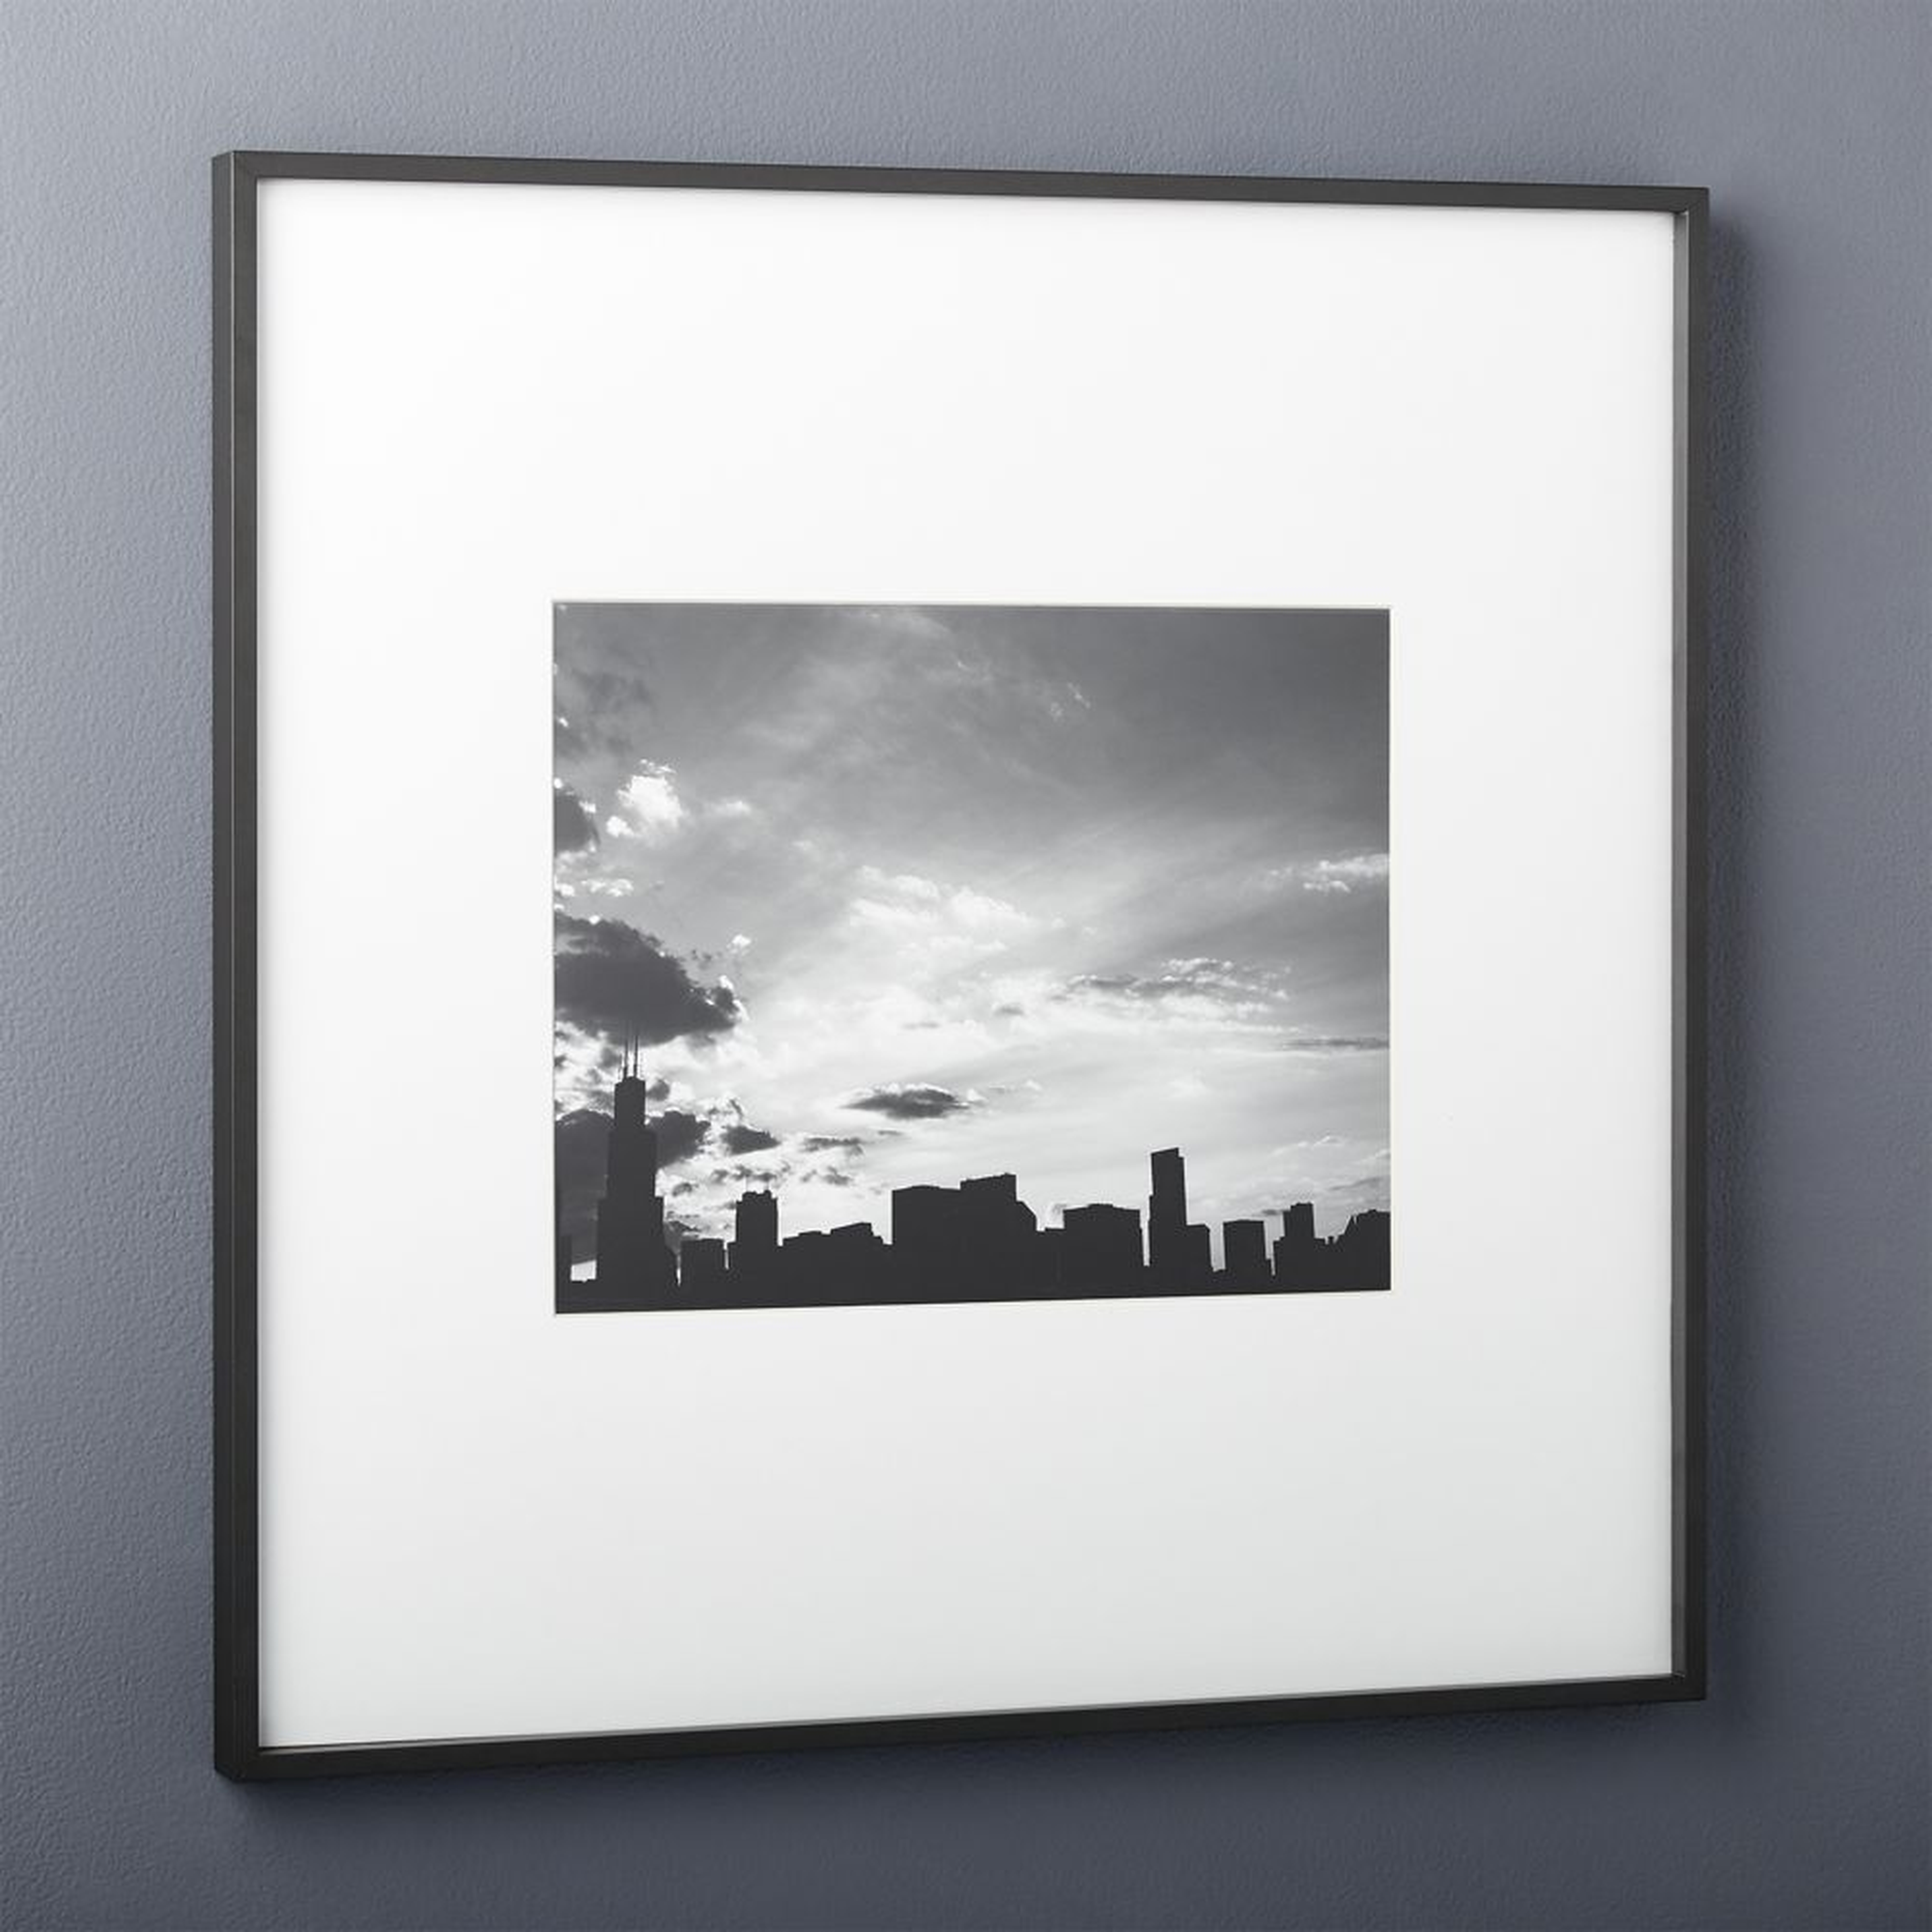 gallery black 11x14 picture frame - CB2